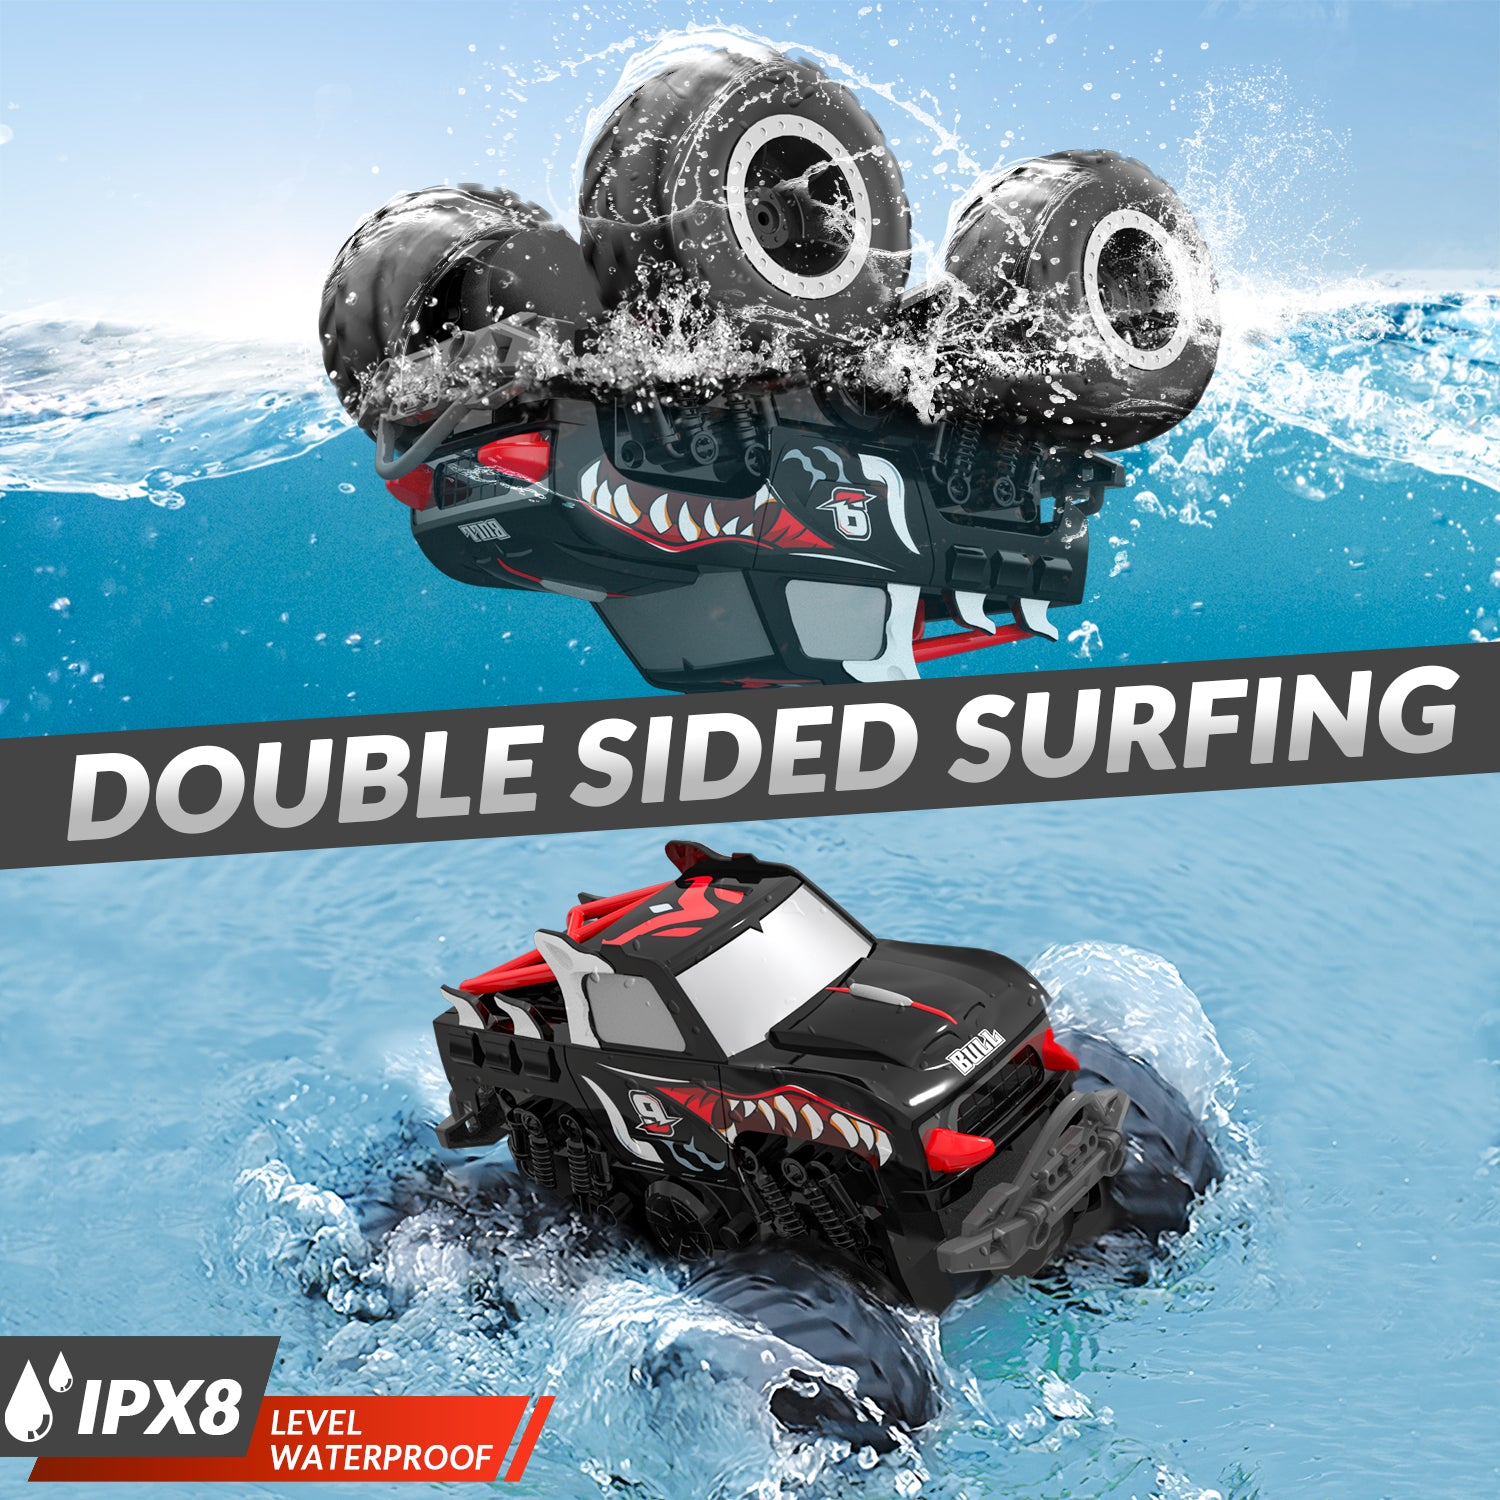 STEMTRON Amphibious Remote Control Car 1:20 All Terrain Off-Road Waterproof RC Monster Truck